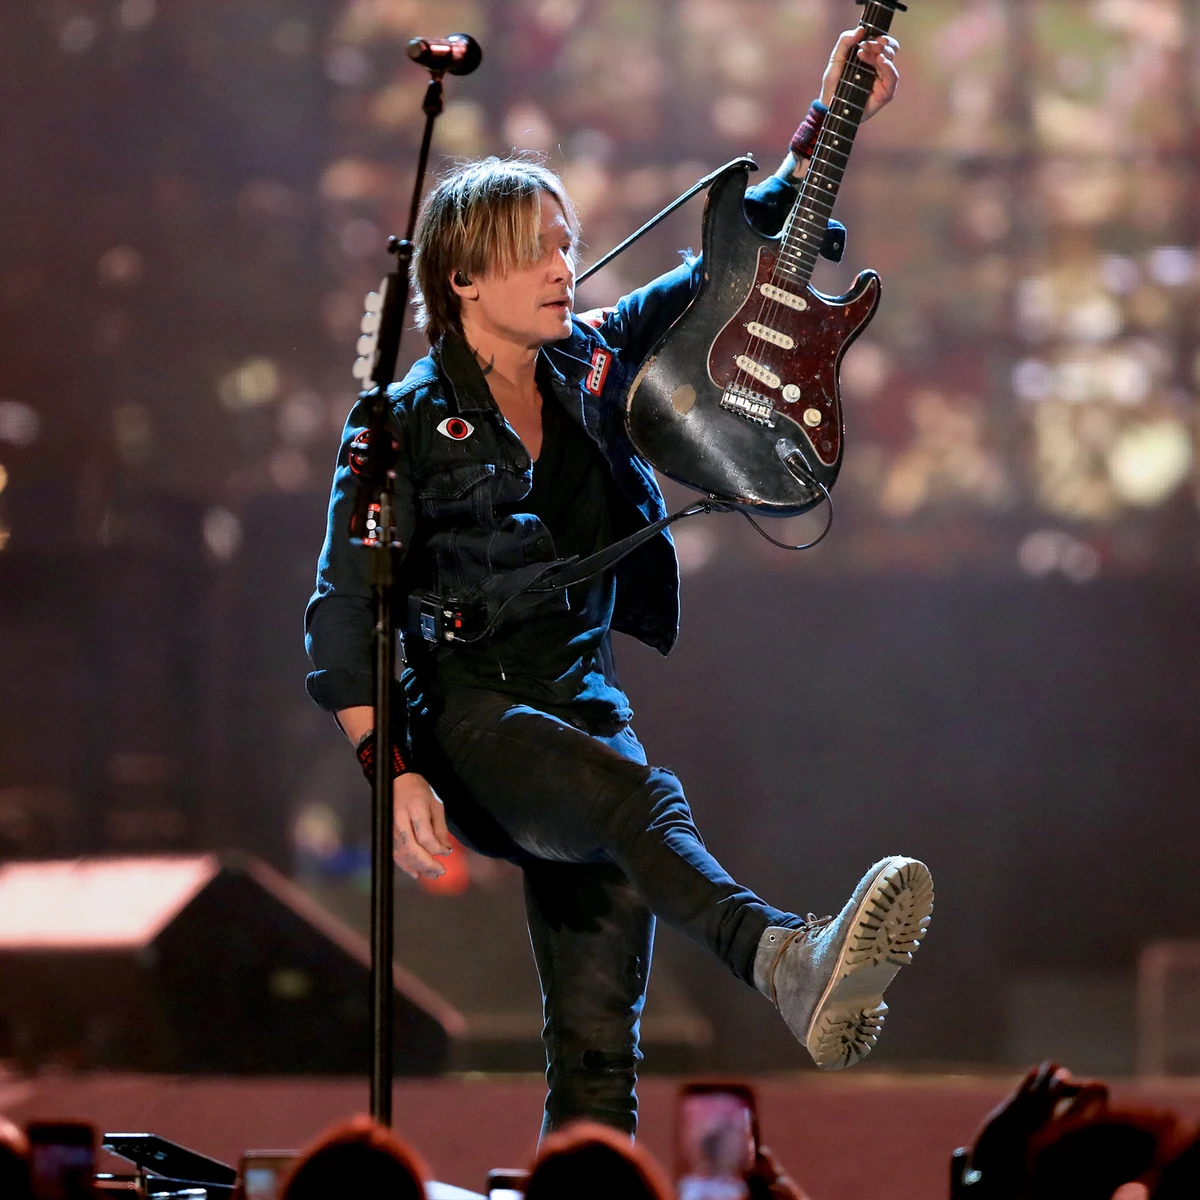 Want To See Keith Urban At The Minnesota State Fair? Tickets Go On Sale Today! Don’t Wait!